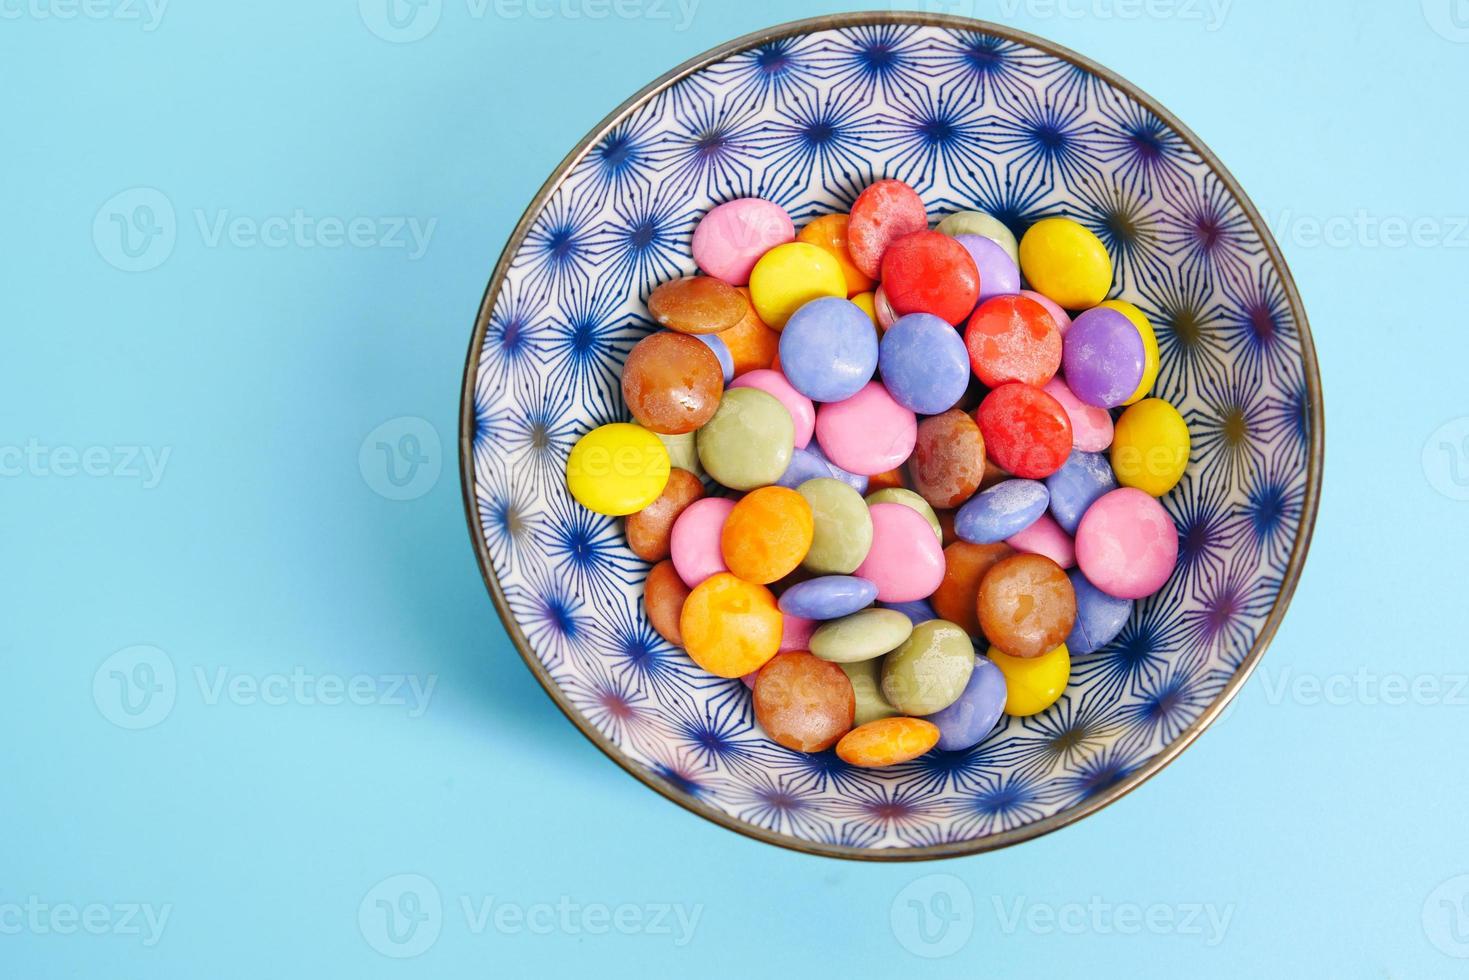 multi-colored sweet candies in a bowl close up photo